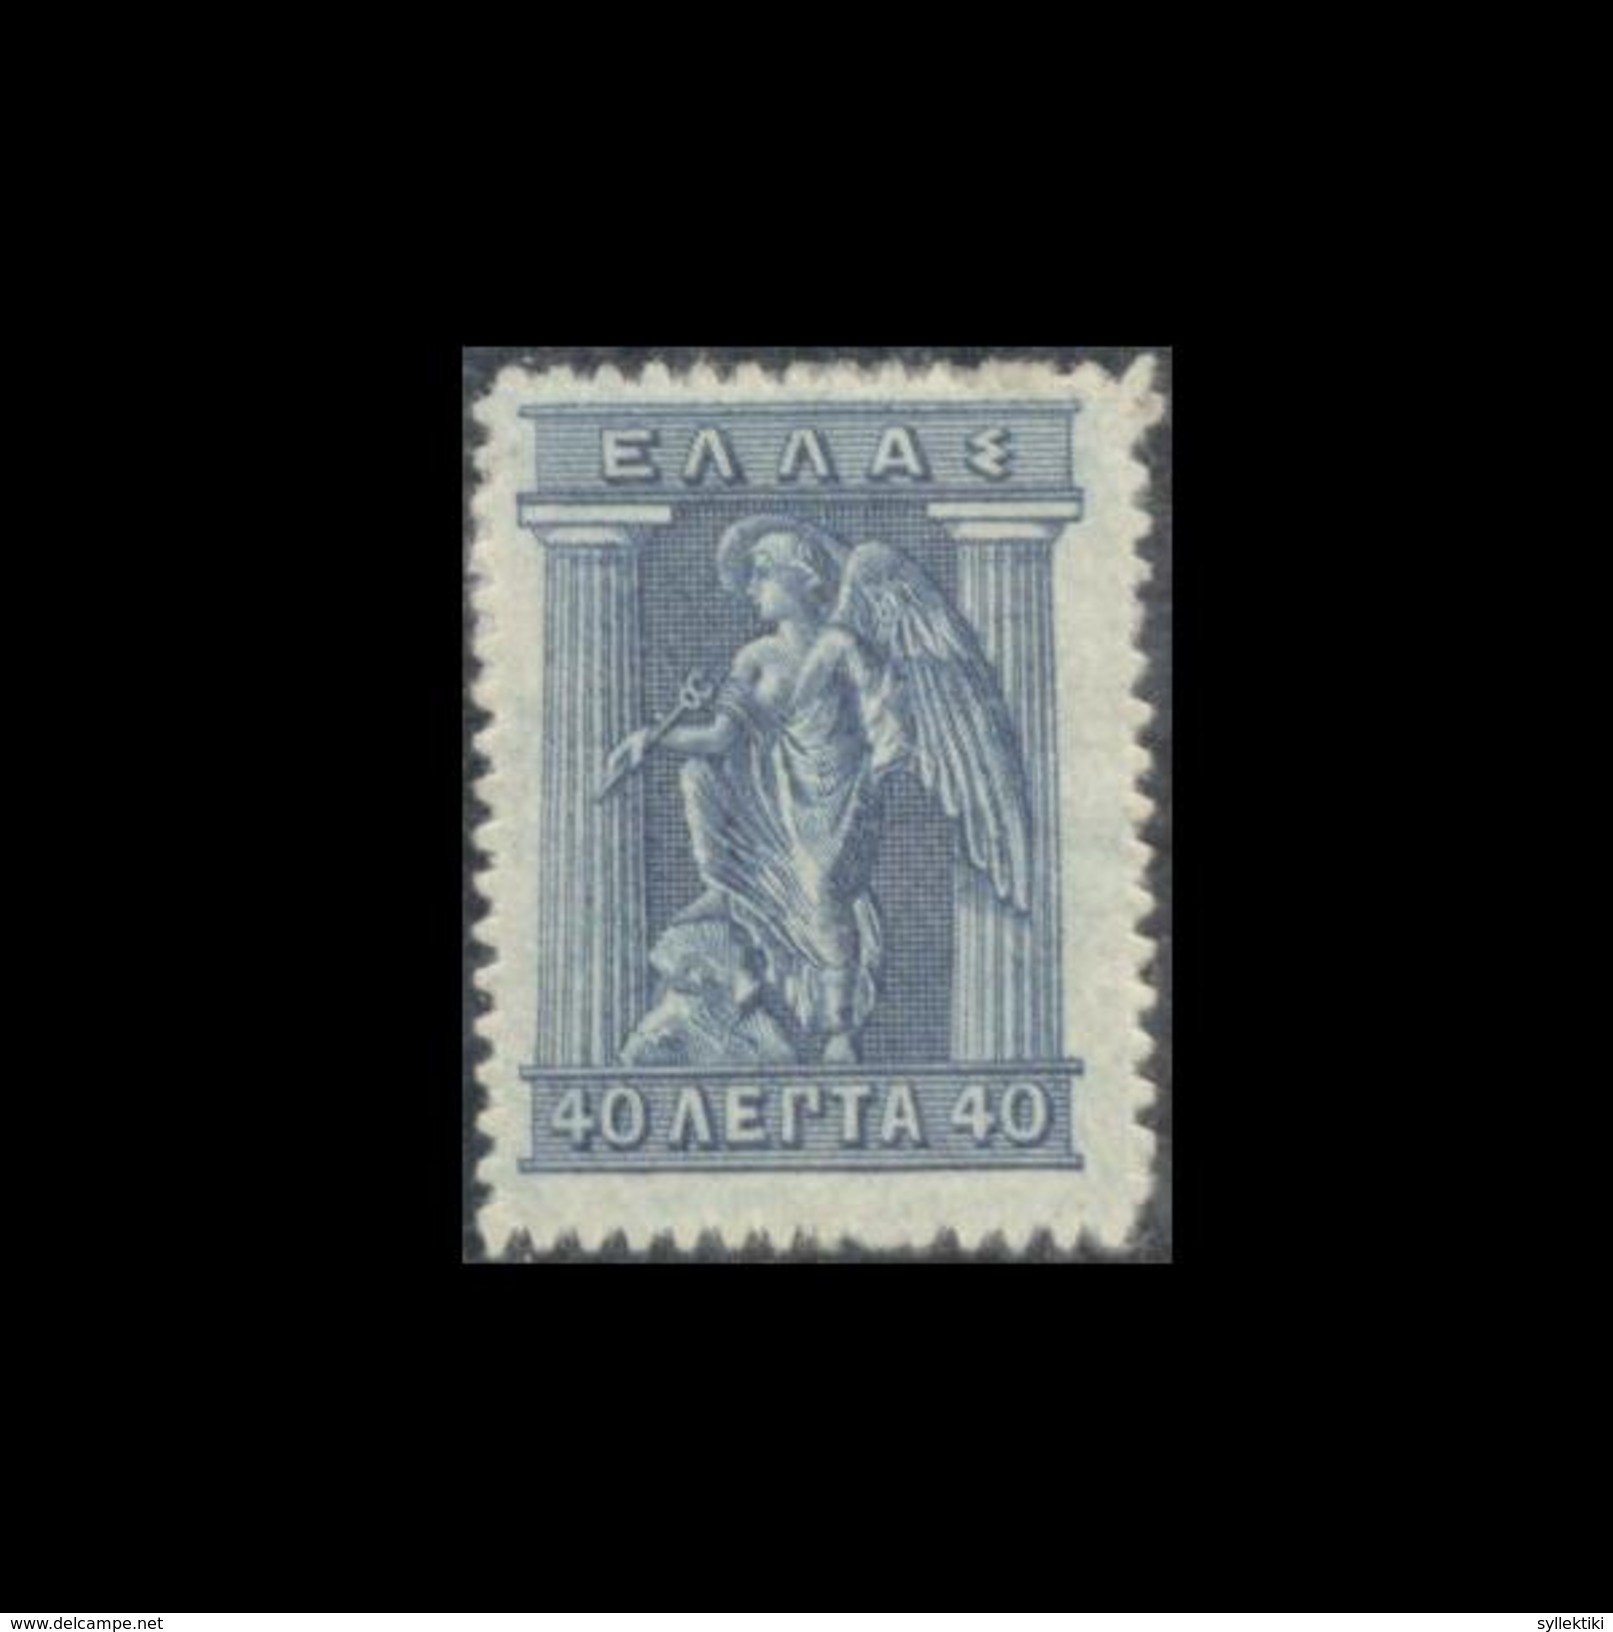 GREECE 1911 ENGRAVING ISSUE 40 LEPTA MH STAMP - Neufs